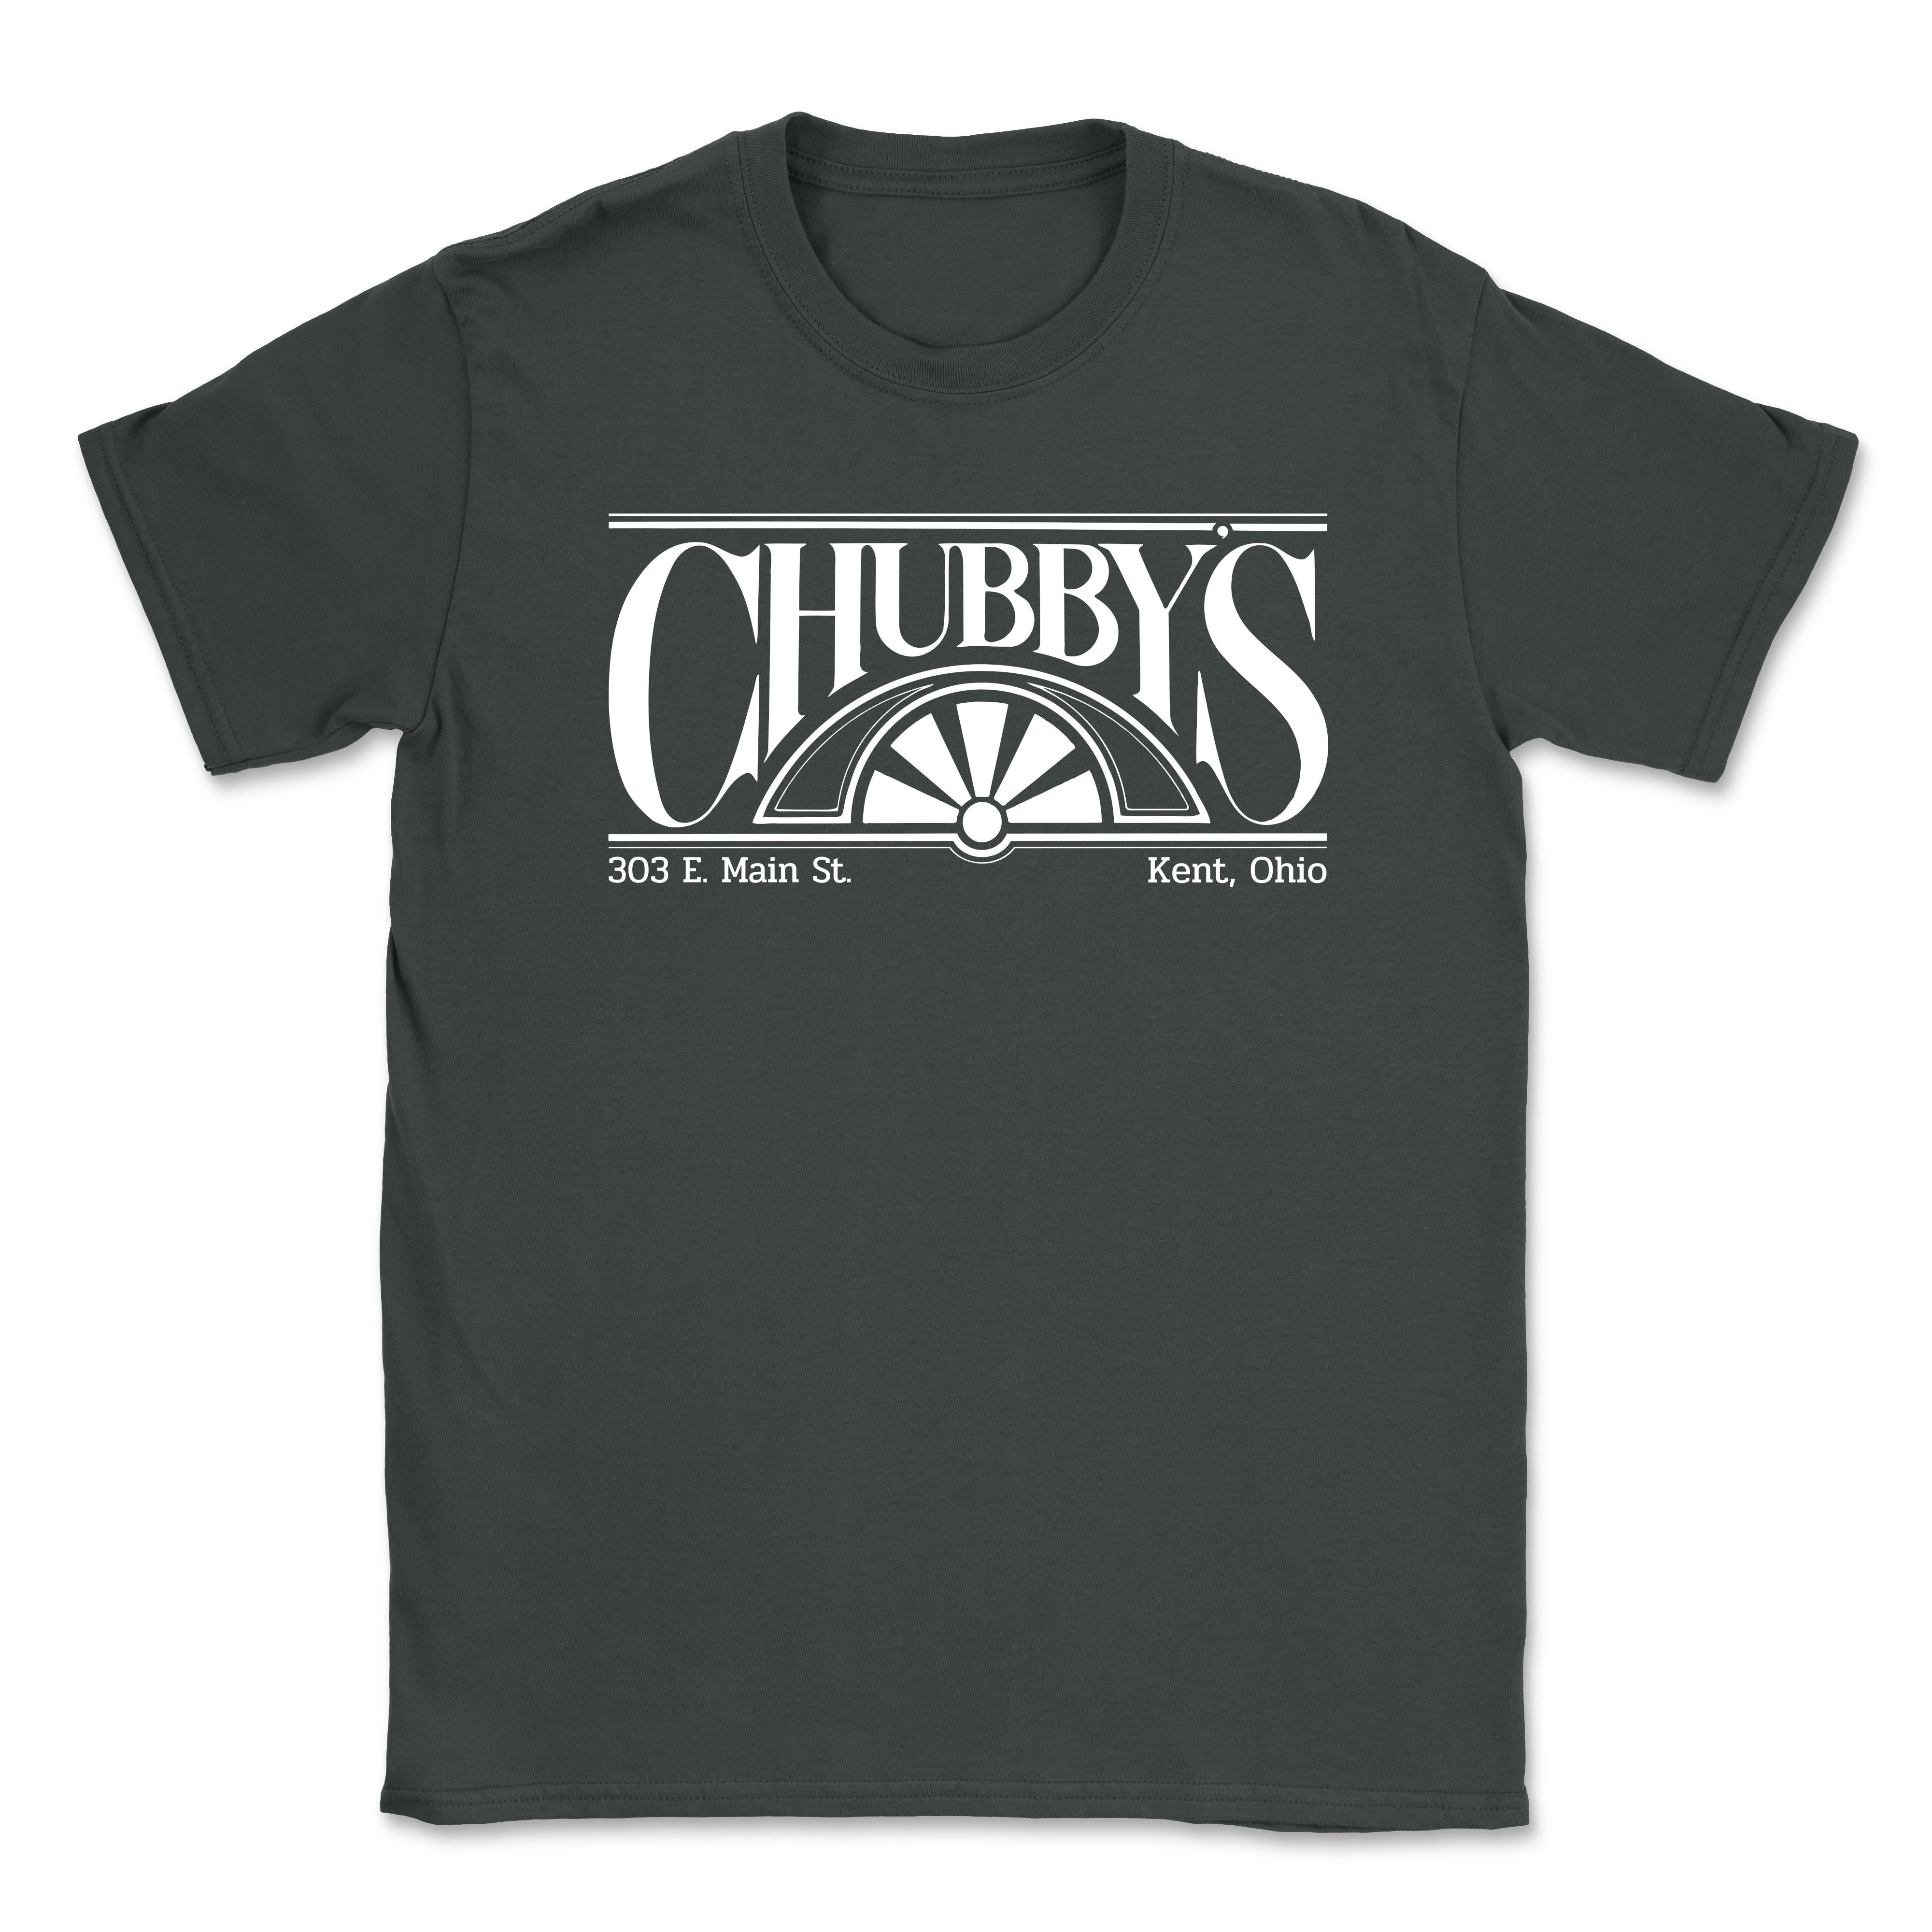 Chubby's Forest Green T-Shirt